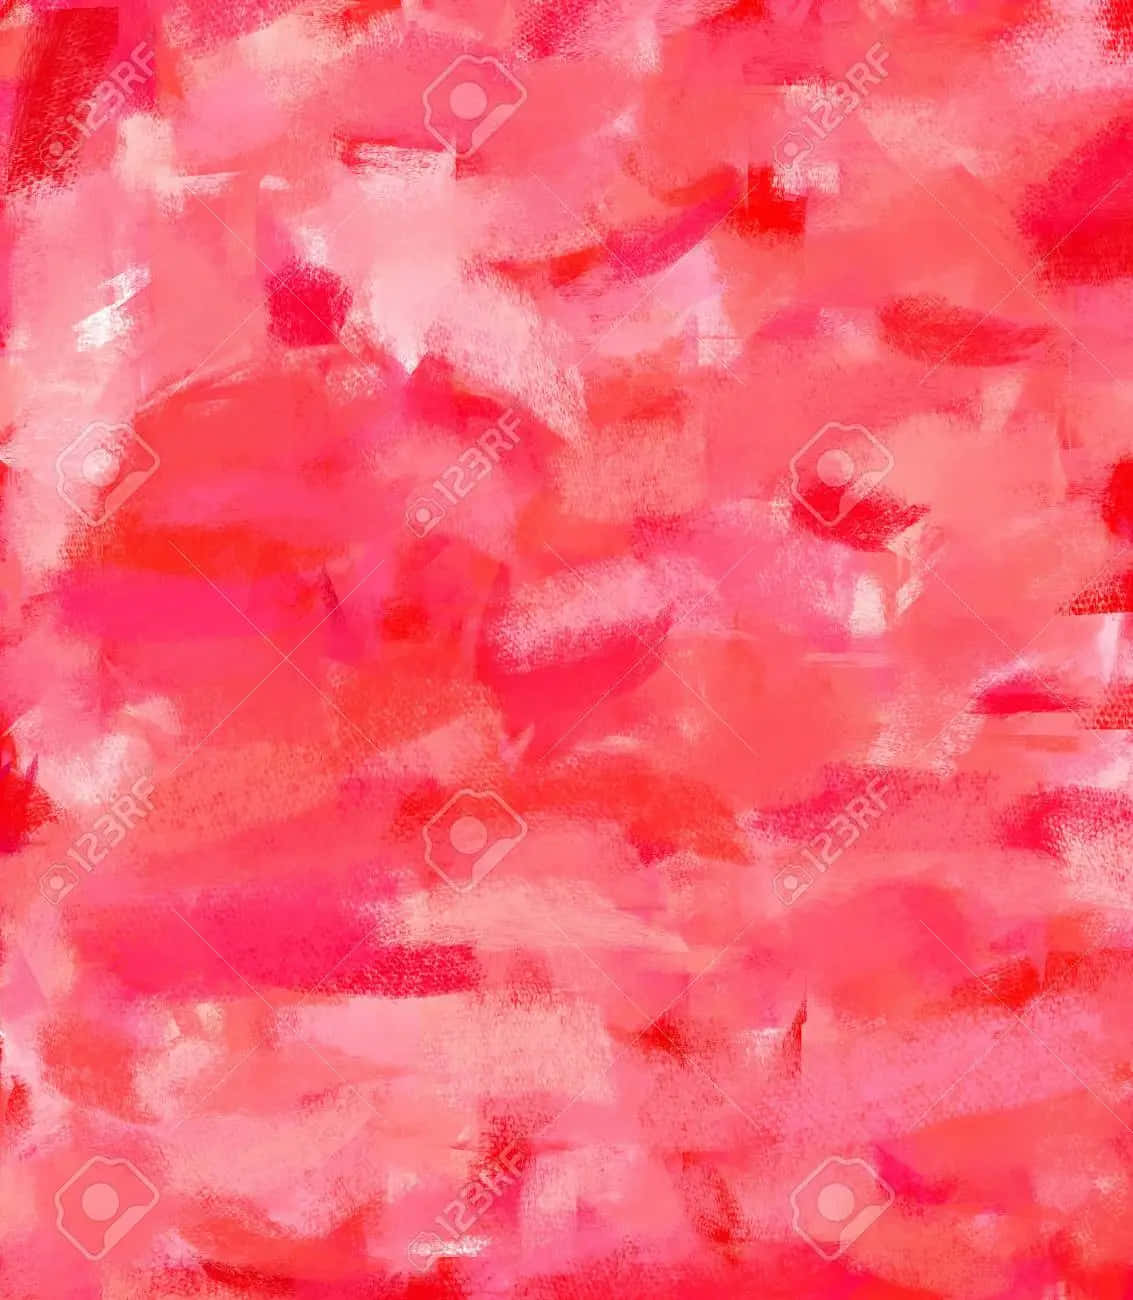 Abstract Red And Pink Paint Brush Strokes Background Stock Photo Wallpaper